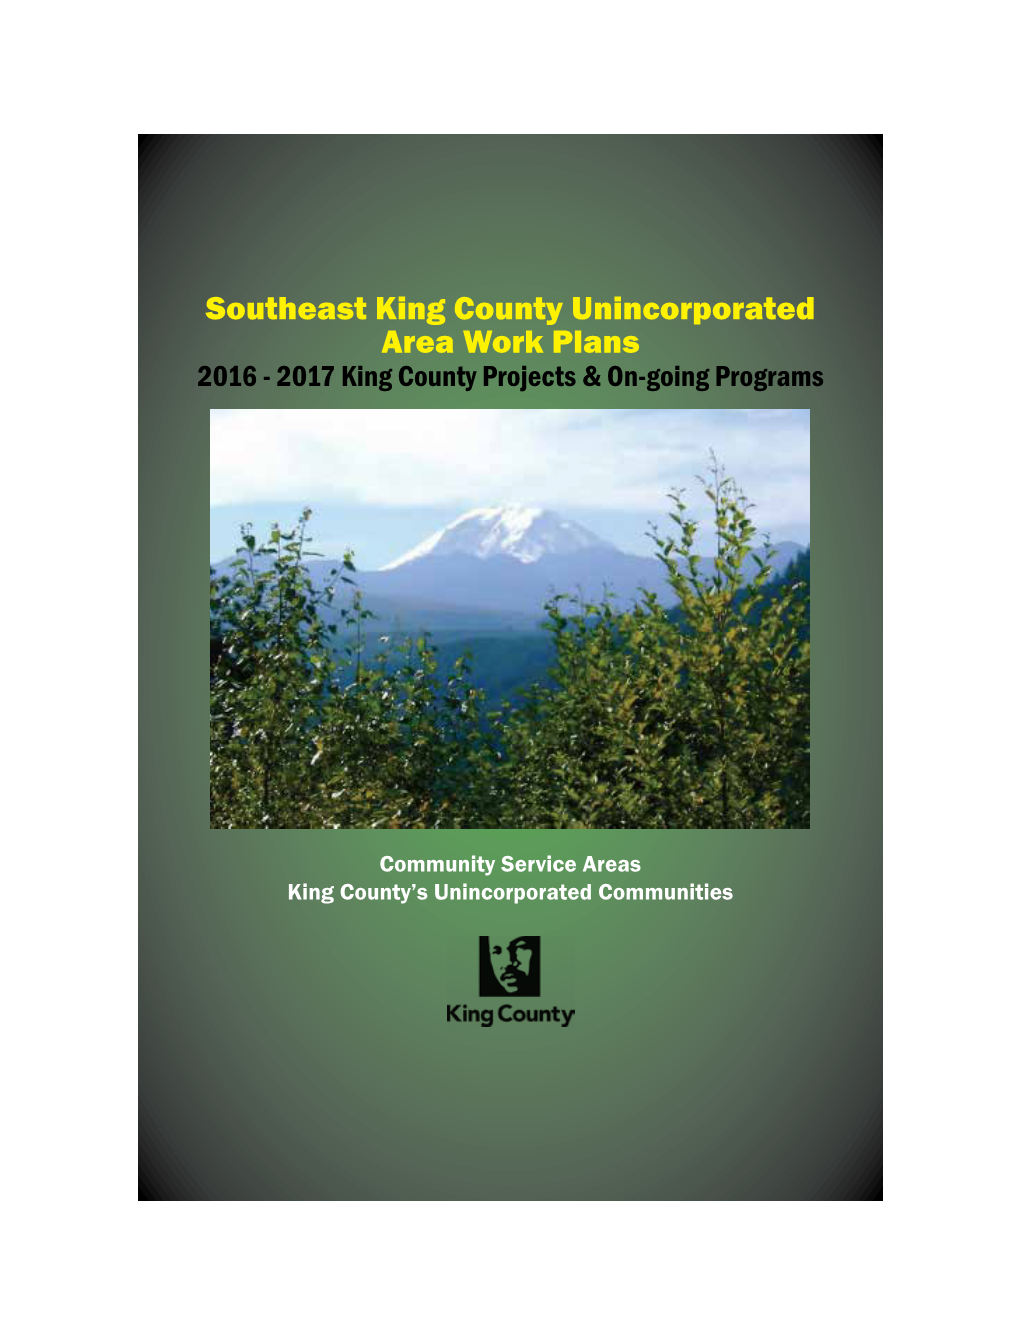 Southeast King County Unincorporated Area Work Plans 2016 - 2017 King County Projects & On-Going Programs